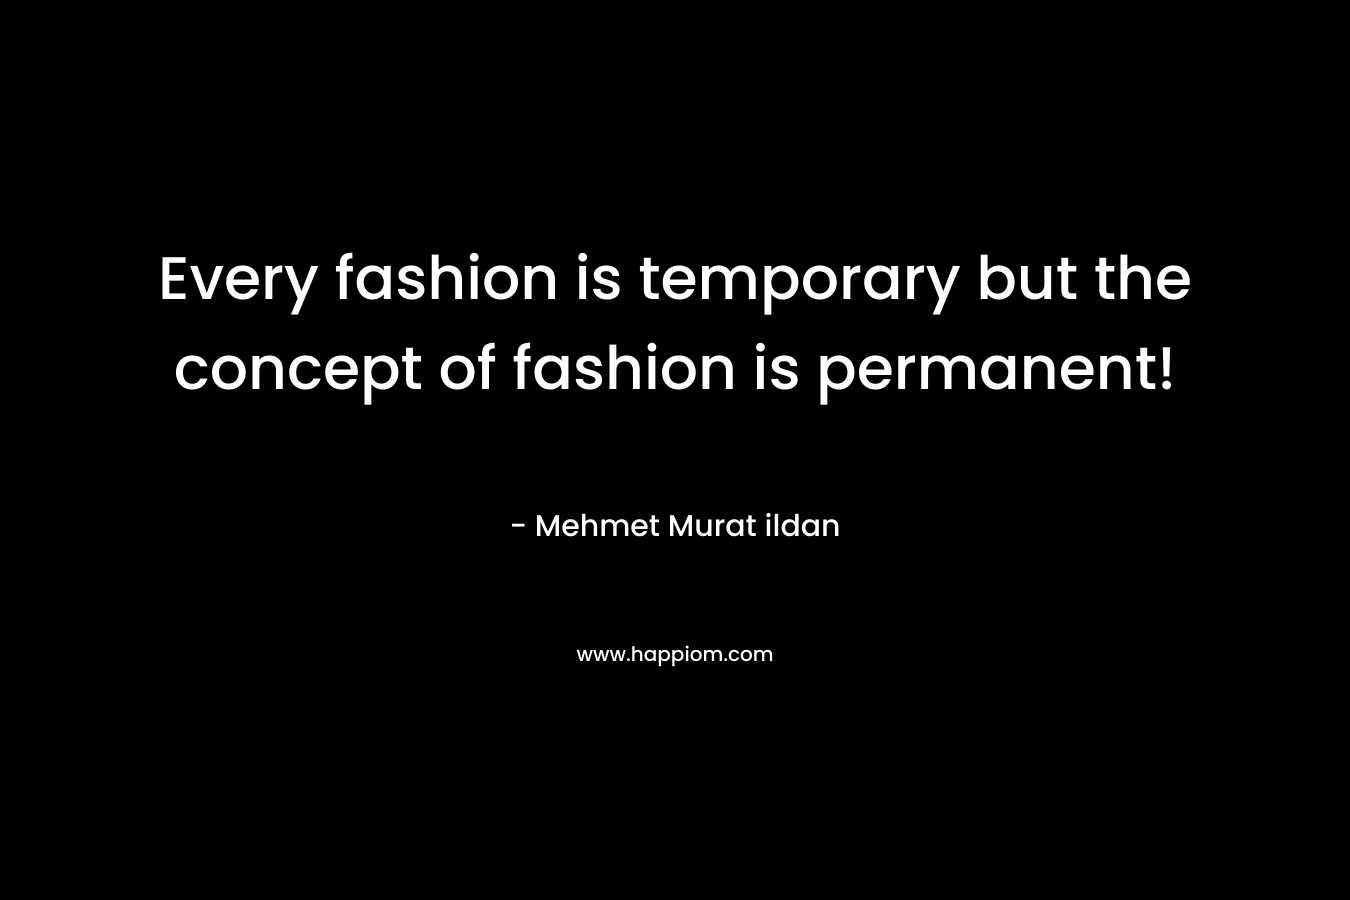 Every fashion is temporary but the concept of fashion is permanent!